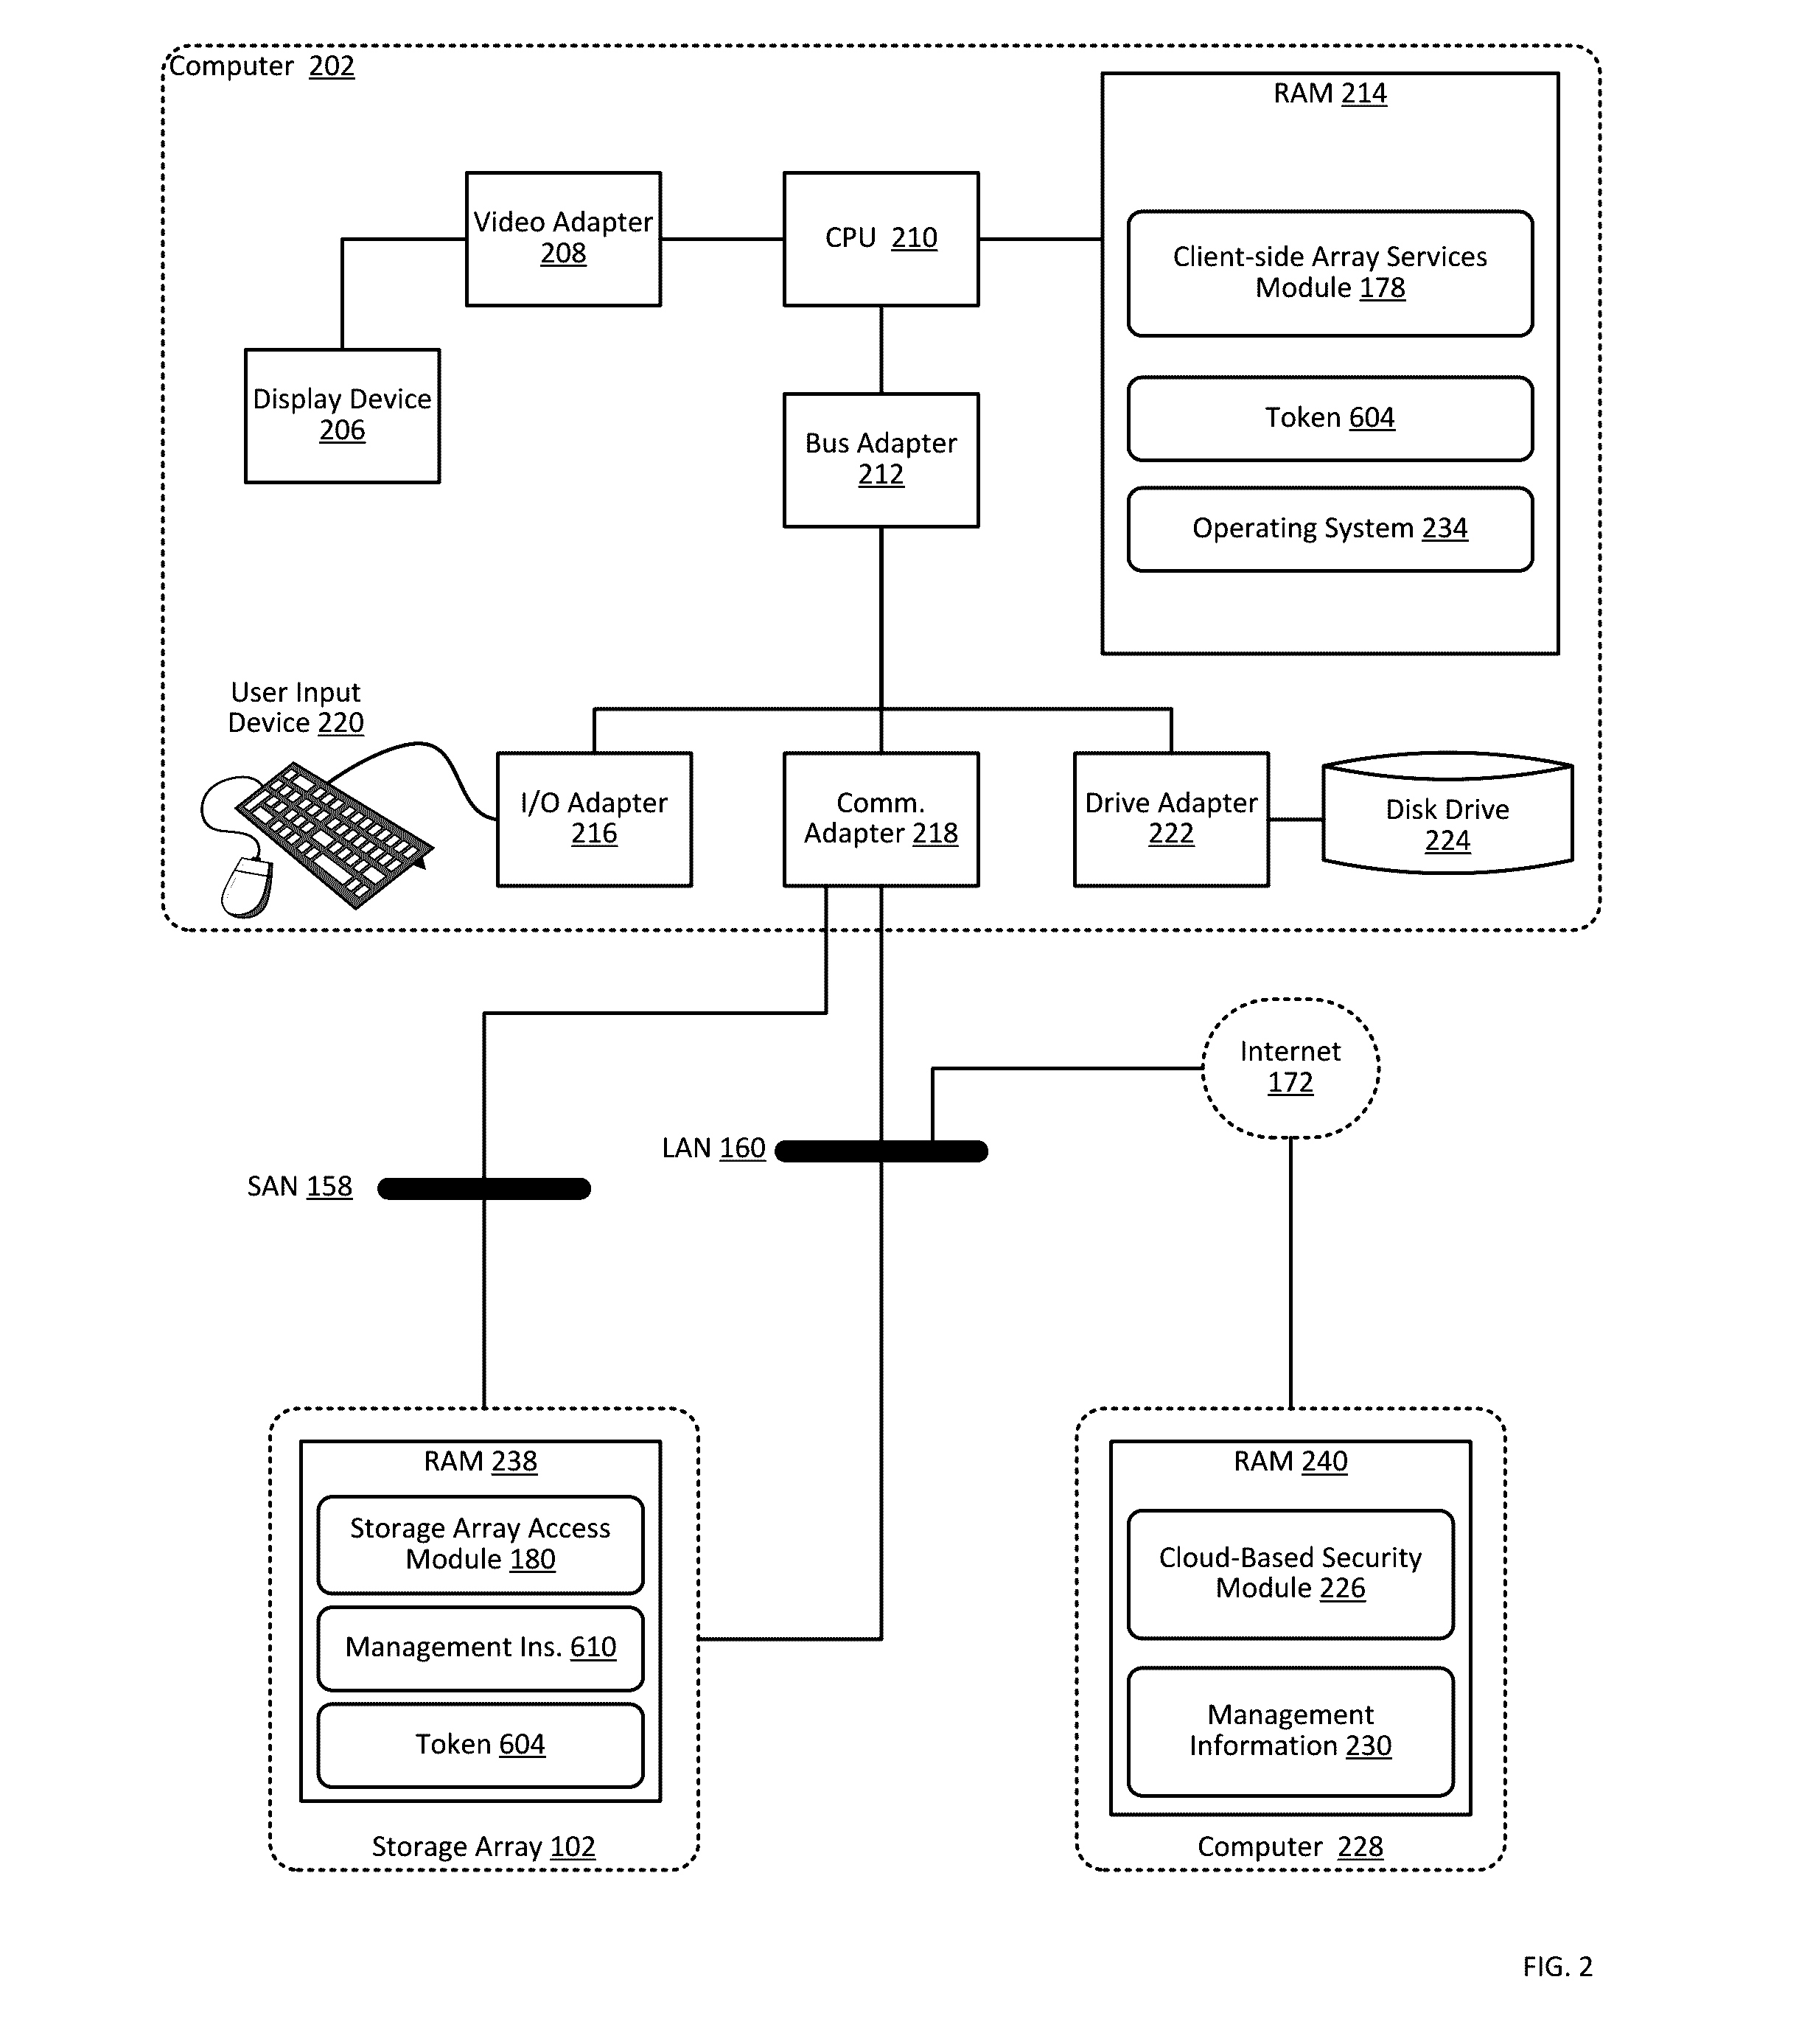 Managing a storage array using client-side services